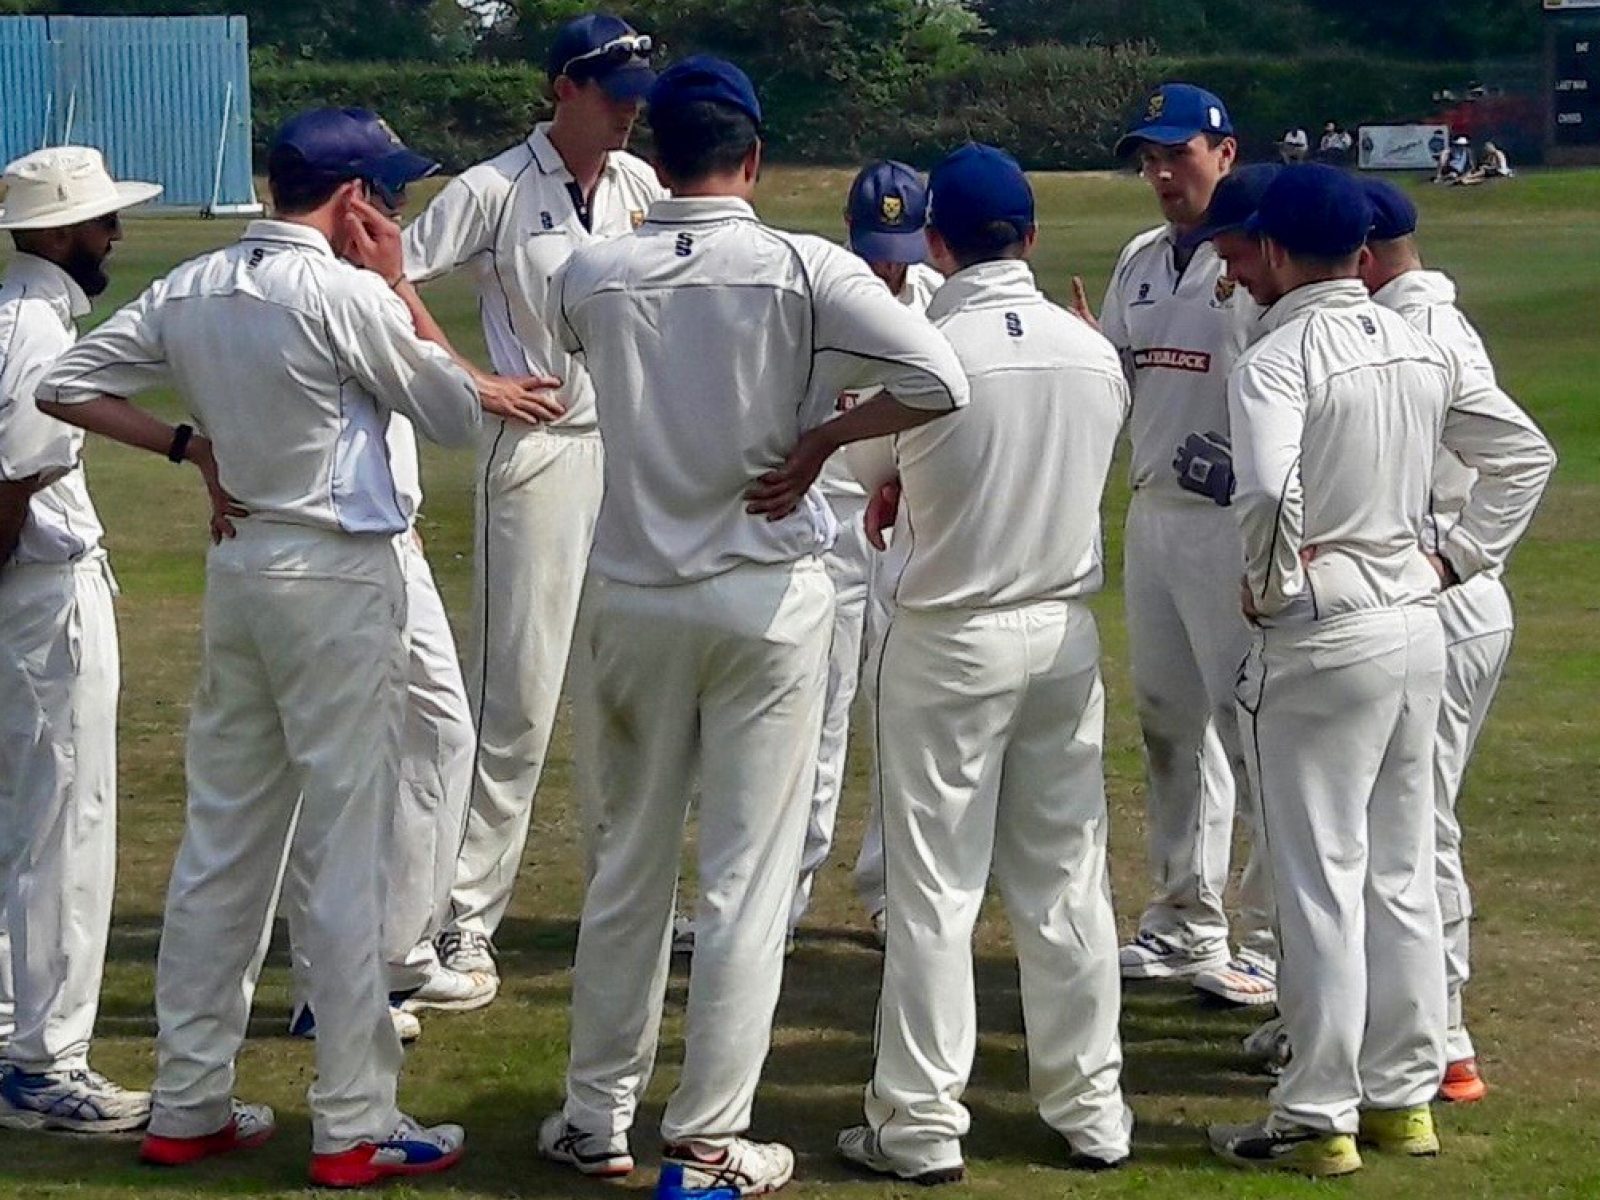 Steve-Leach-the-captain-talks-to-the-Shropshire-side-during-the-match-against-Herefordshire-at-Whitchurch